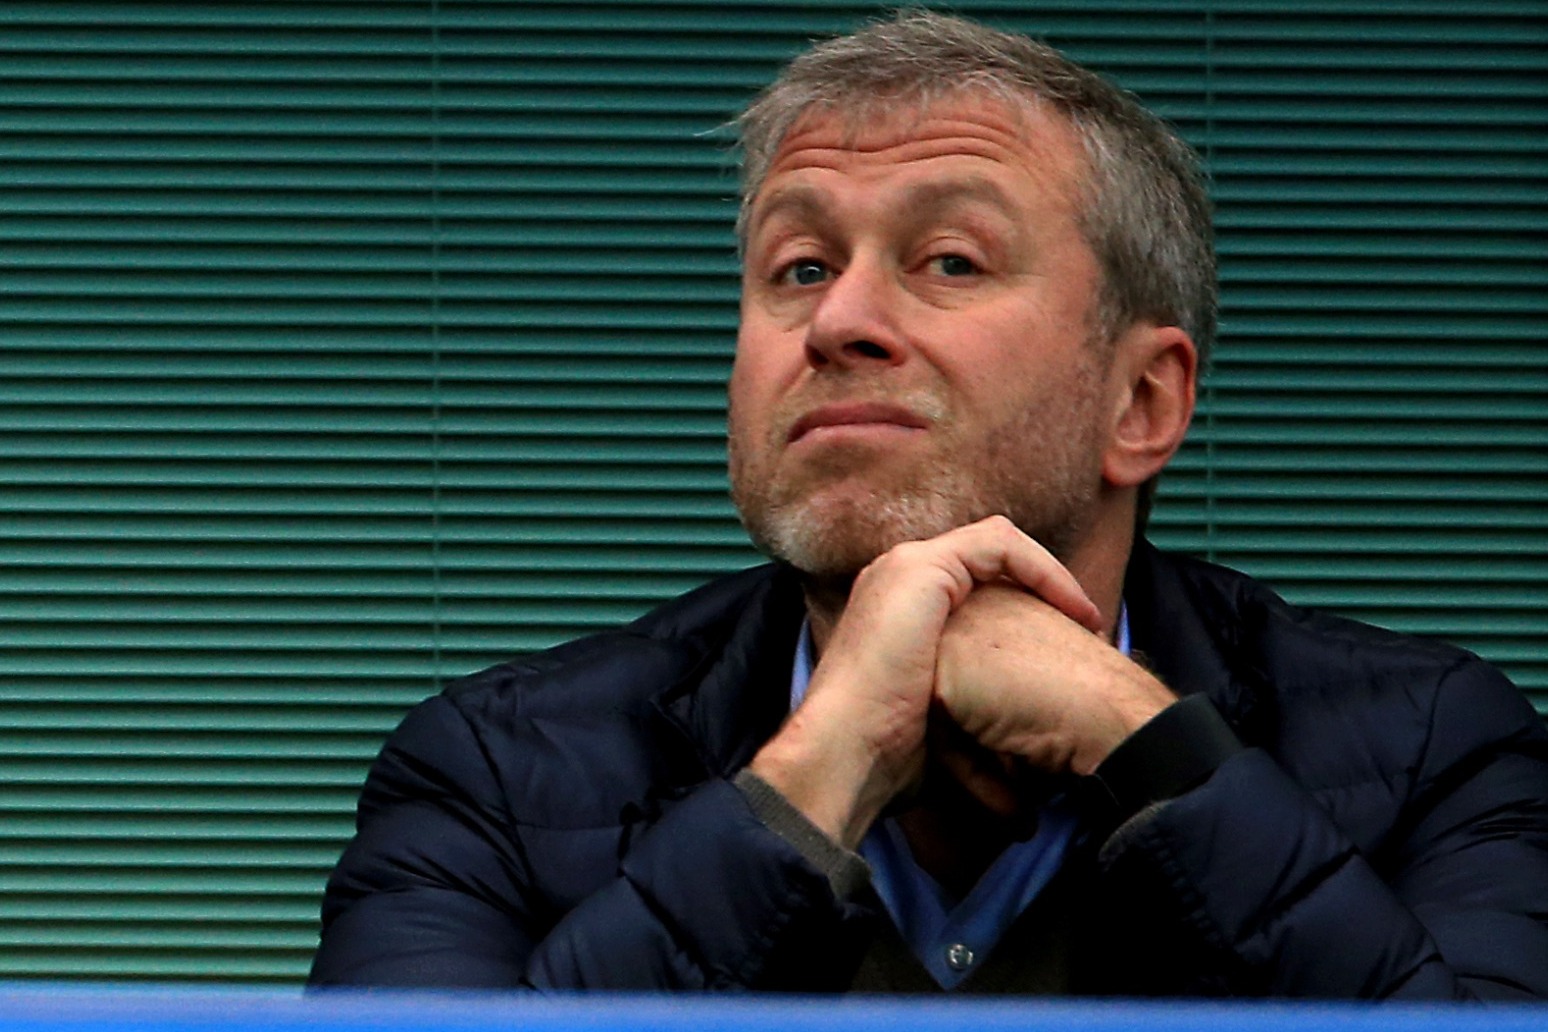 Roman Abramovich ‘suffered symptoms of suspected poisoning’ after peace talks 